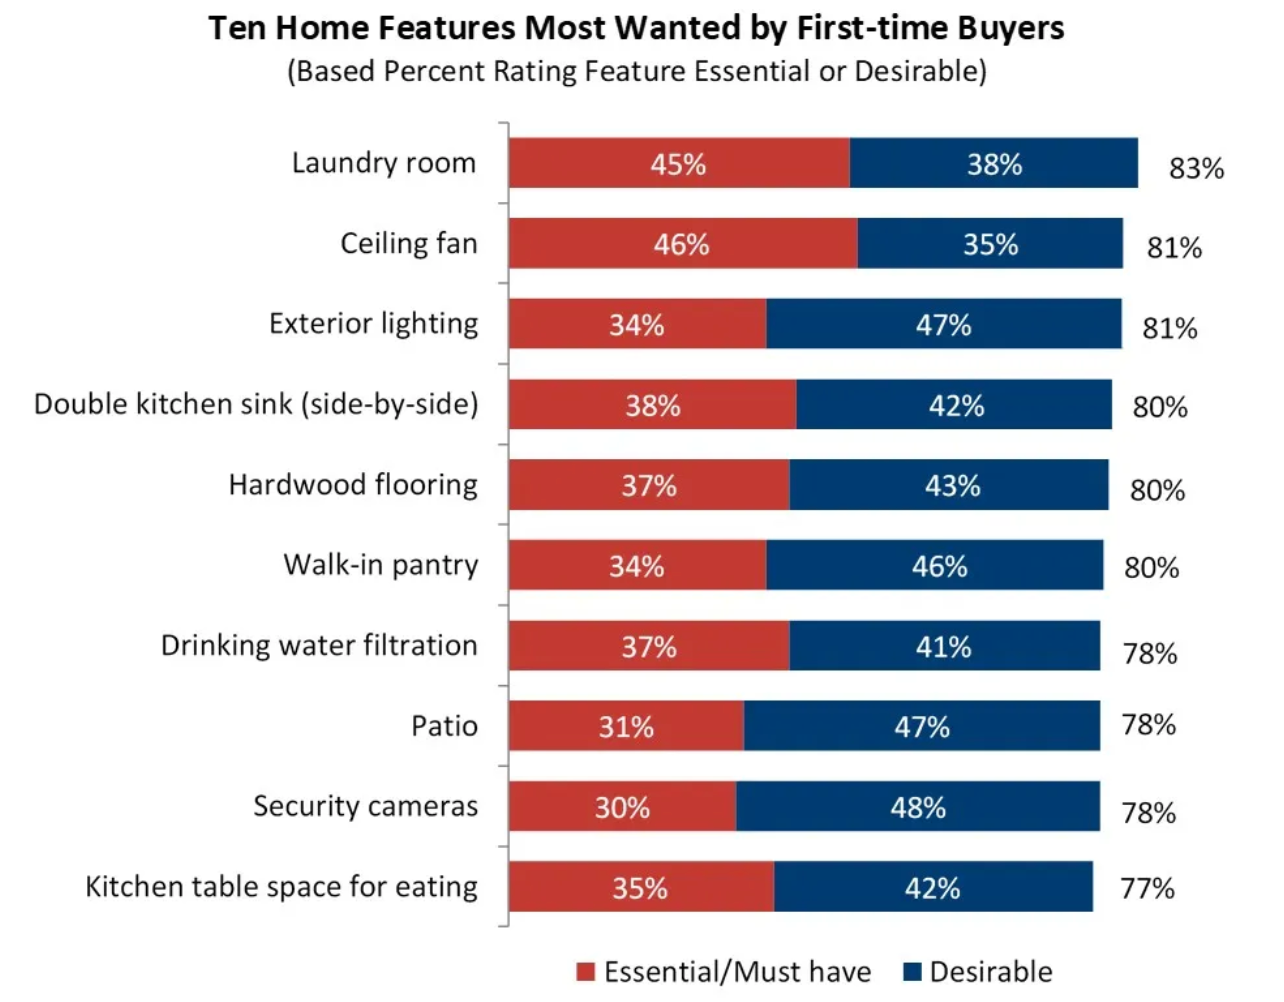 A bar chart showing what features first-time buyers want most in a home